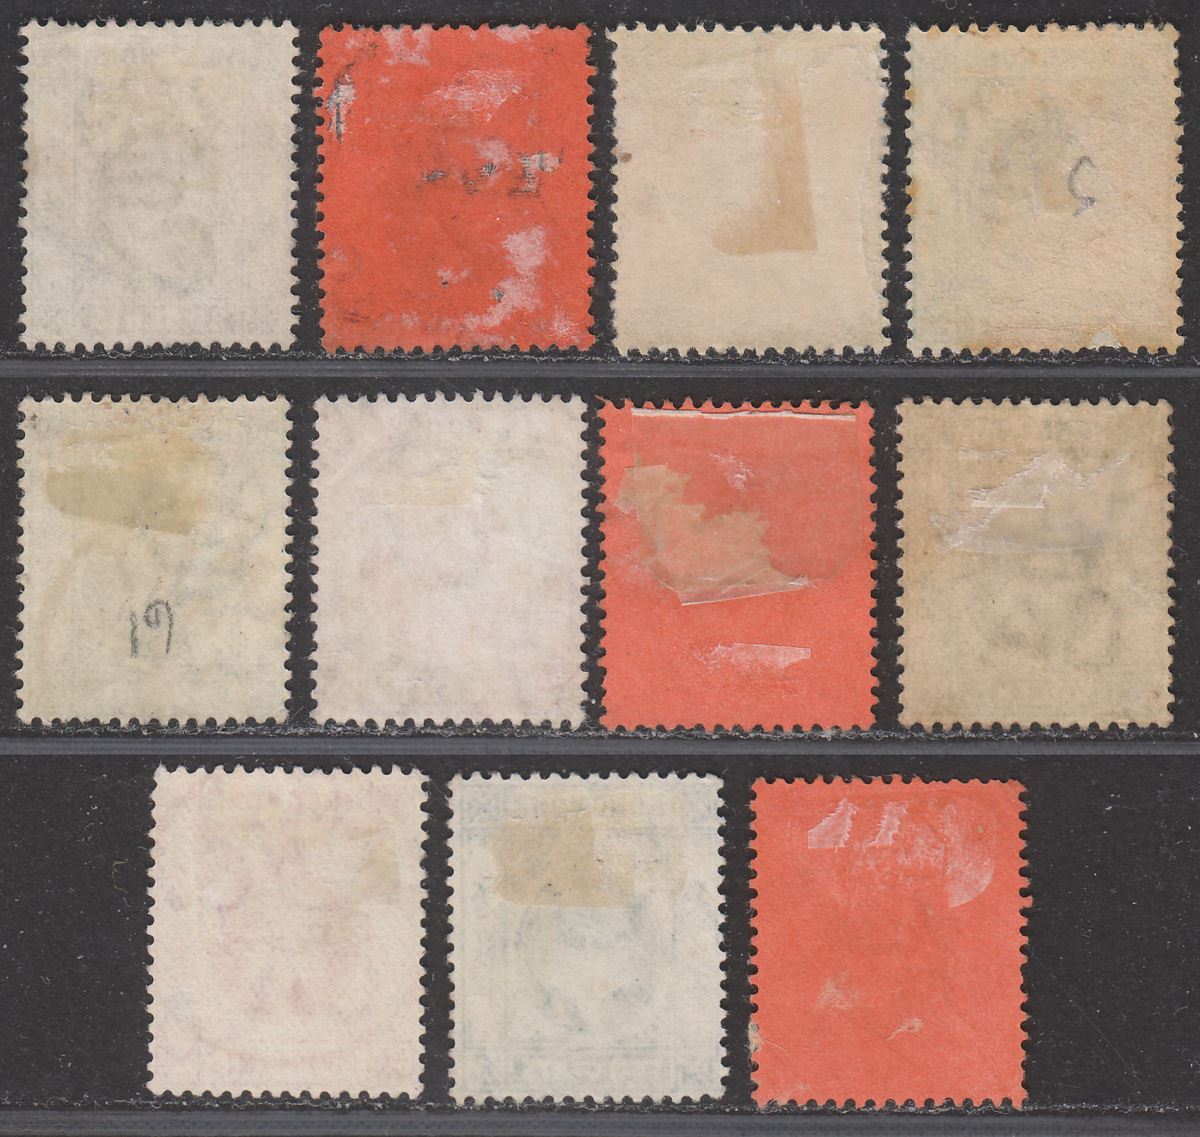 Hong Kong KEVII Selection to 30c Used with AMOY Postmarks